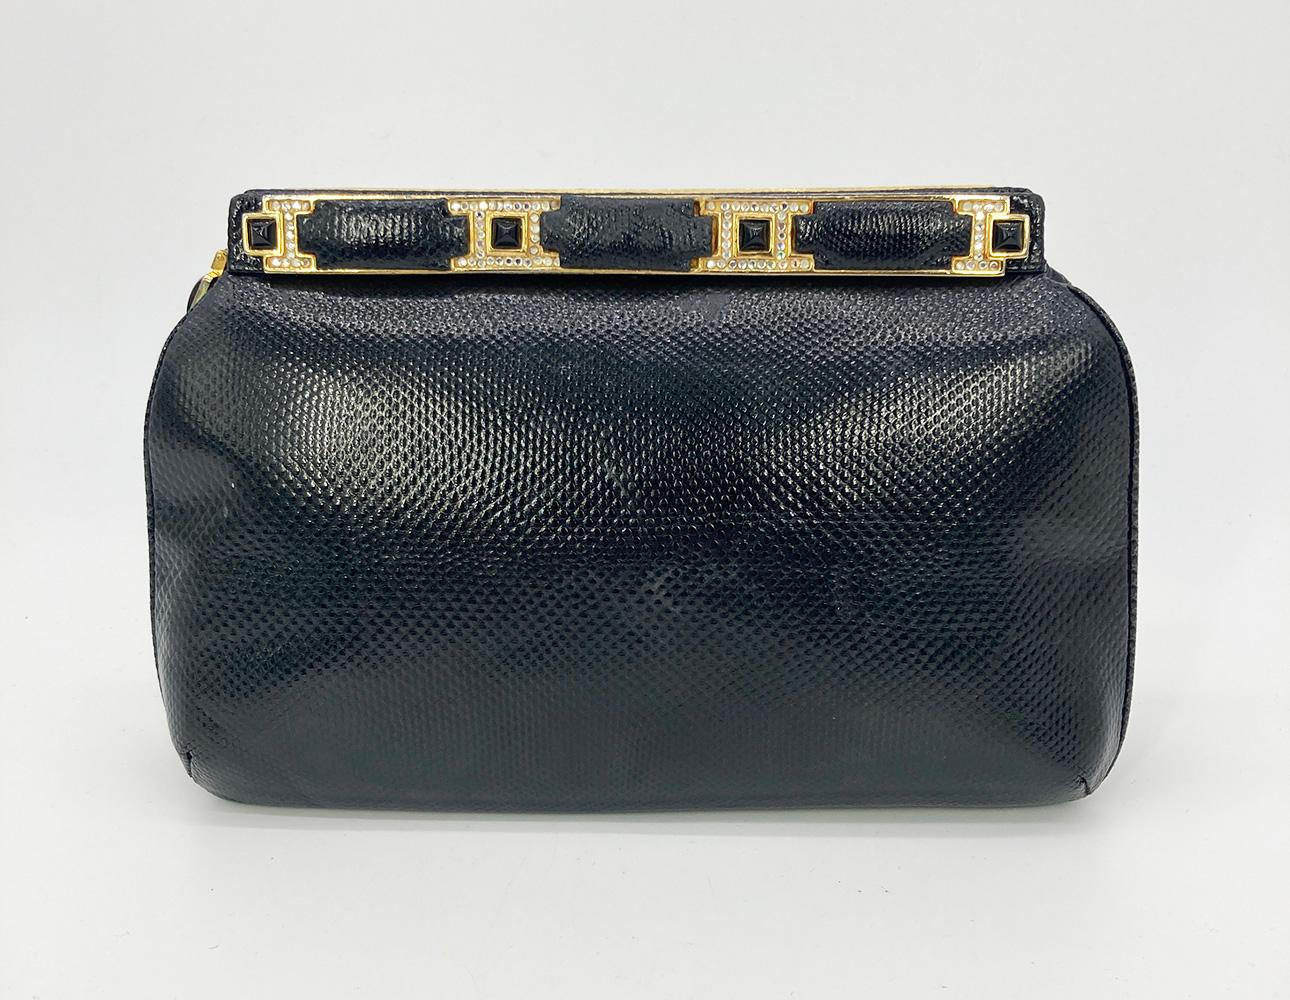 Judith Leiber Black Lizard Crystal and Leather Top Clutch In Good Condition For Sale In Philadelphia, PA